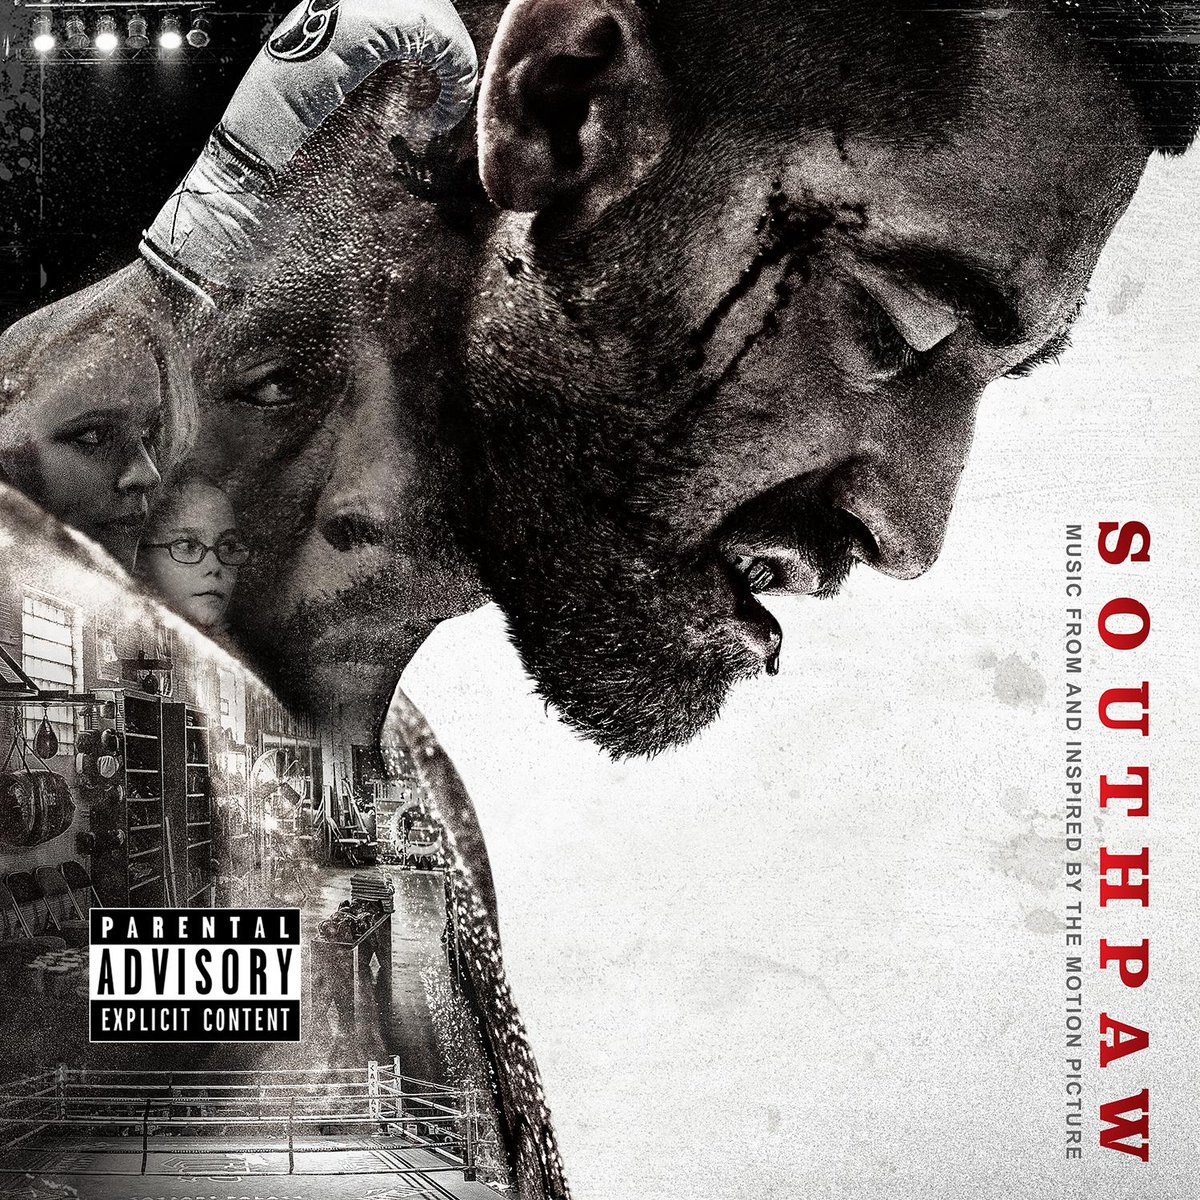 RT @ShadyRecords: The #Southpaw Soundtrack is available now! Get it on @AppleMusic here: http://t.co/070i6ntUOe http://t.co/YT410wsOg1